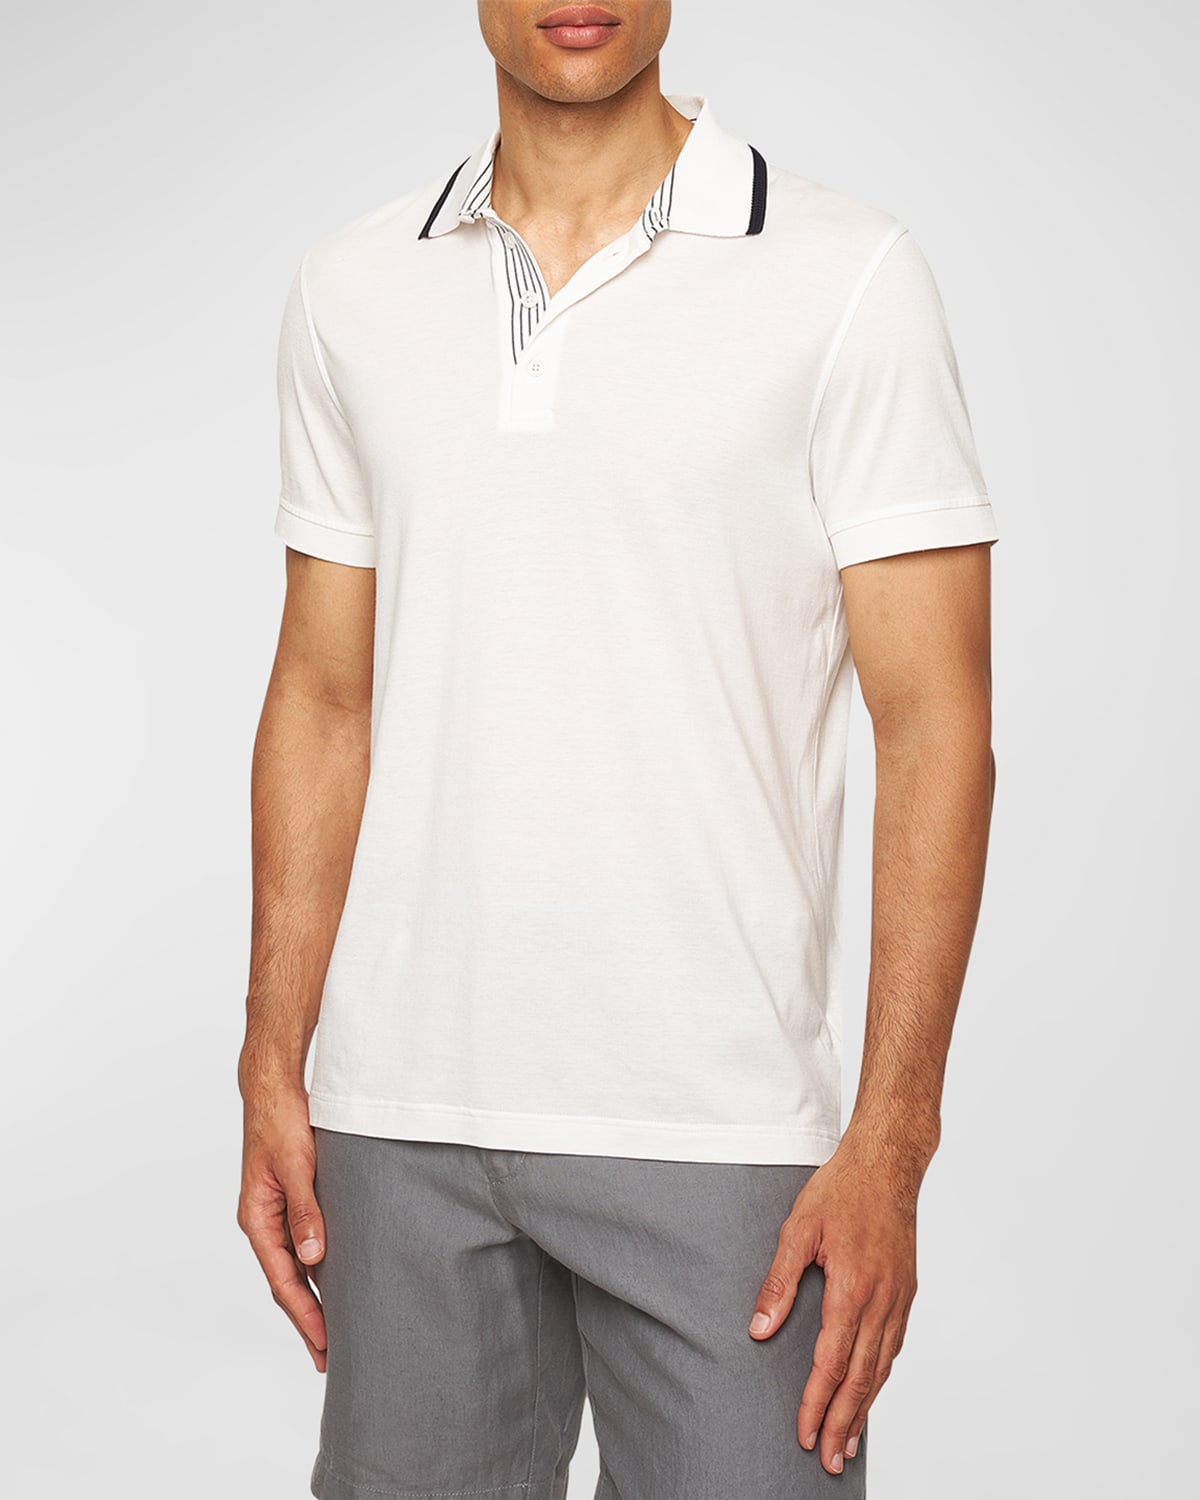 Orlebar Brown Dominic Tipping Knitted Polo Shirt In White